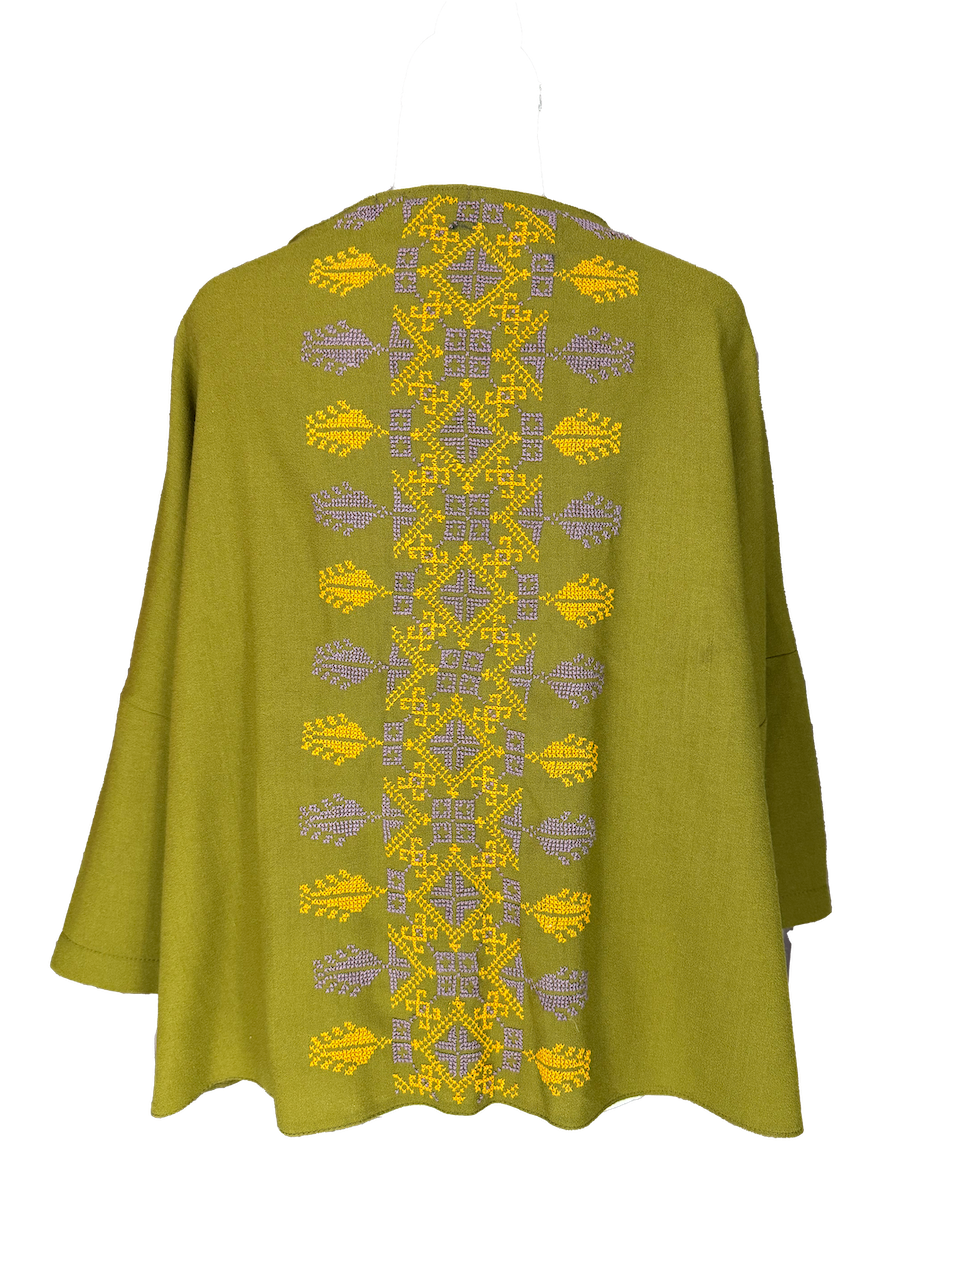 The Heavily Embroidered Boxy in Olive Green With Purple and Yellow Embroidery